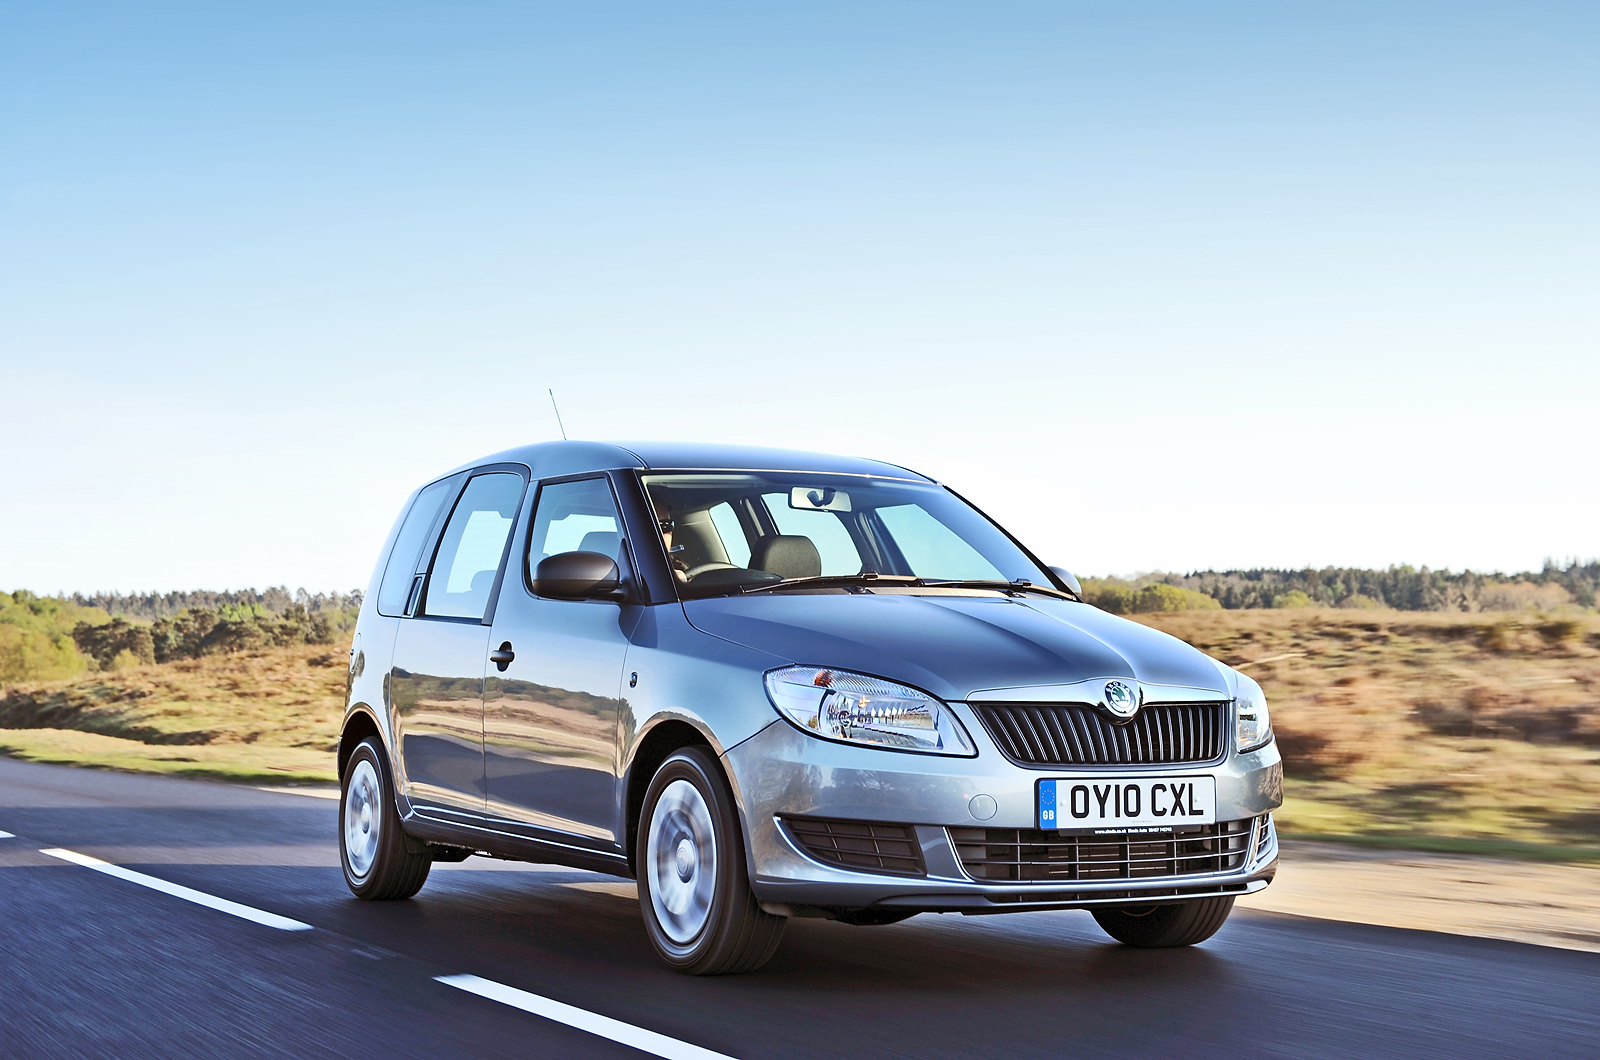 Used Skoda Roomster 2006-2015 review